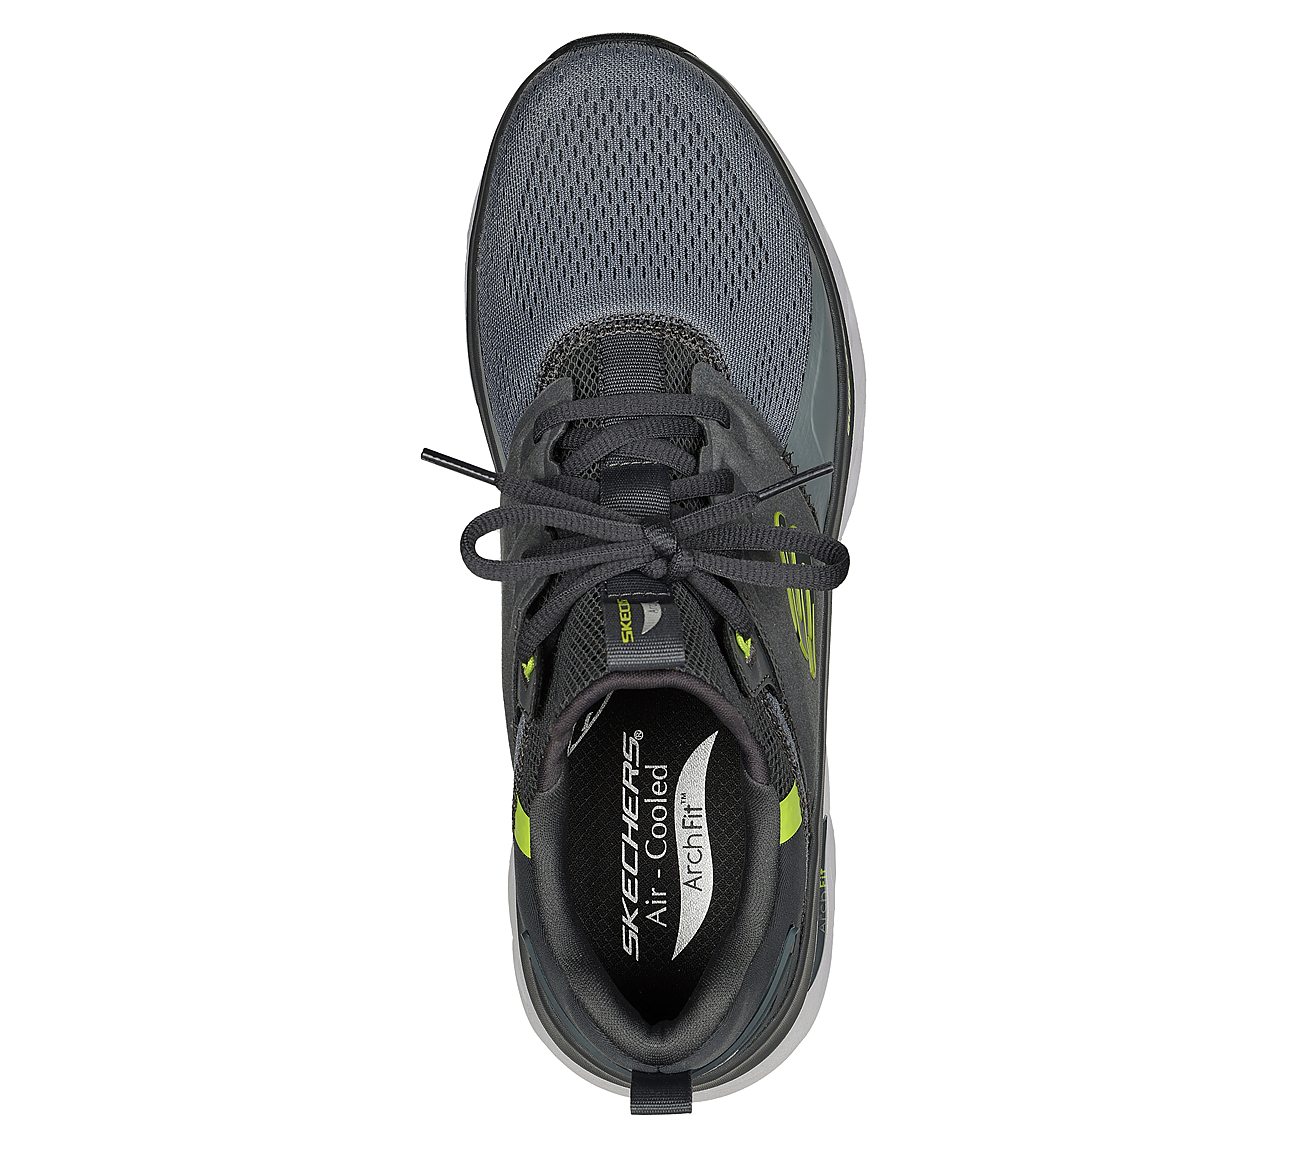 ARCH FIT GLIDE-STEP, CHARCOAL/LIME Footwear Top View